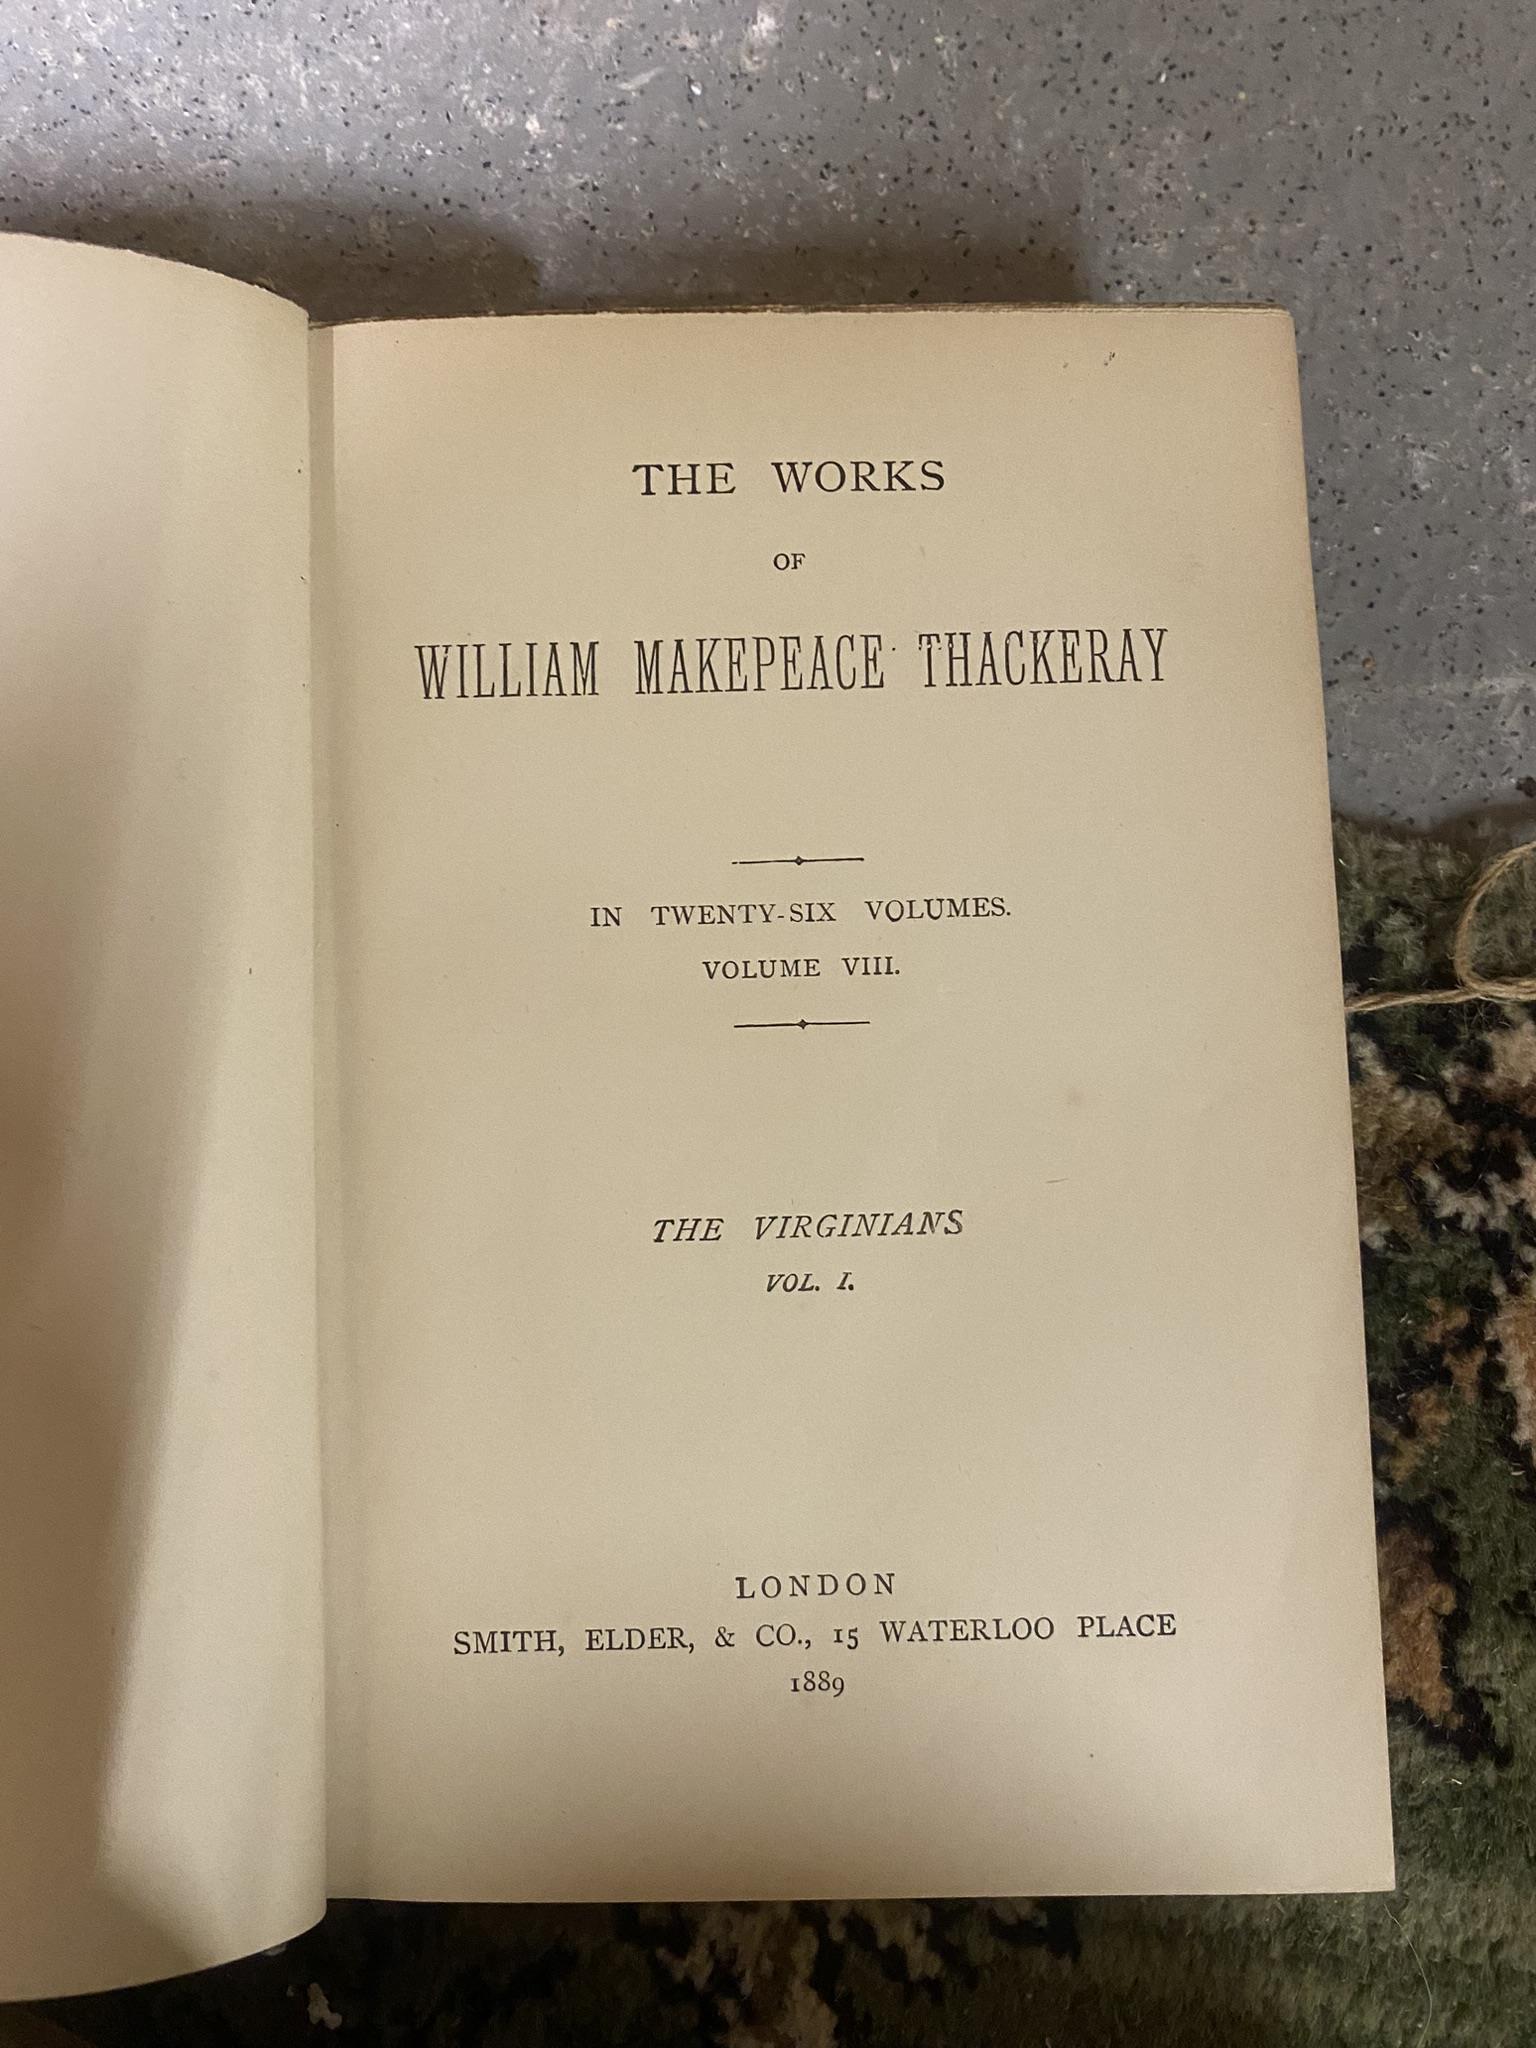 The Works of William Makepeace Thackery in 26 Volumes, 1889 - Image 4 of 4